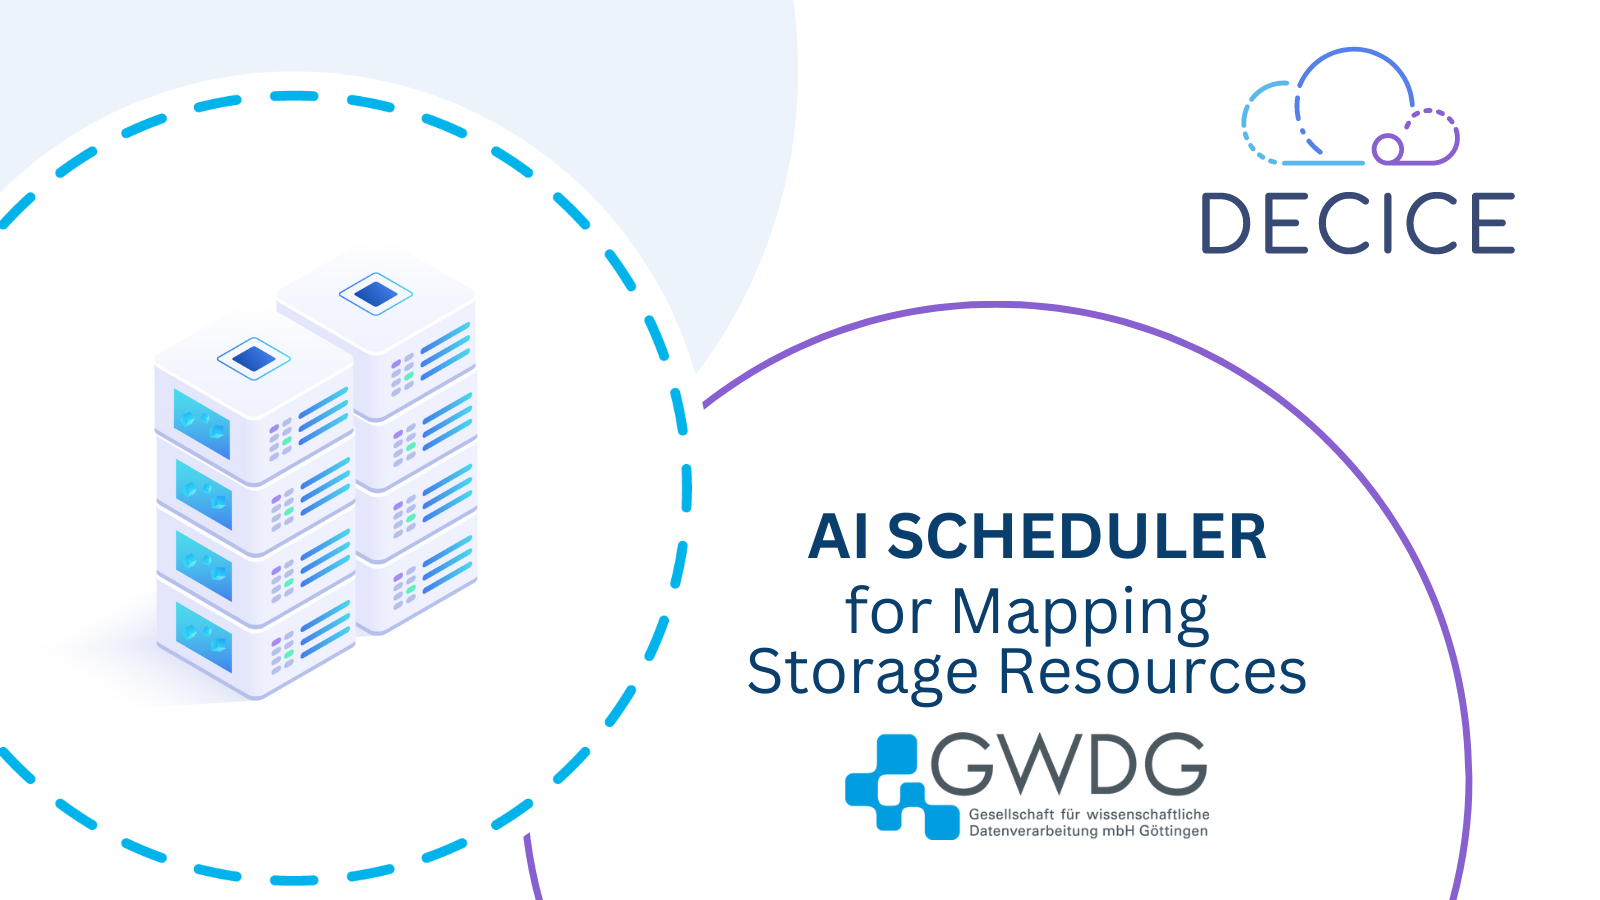 AI Scheduler for Mapping Storage Resources